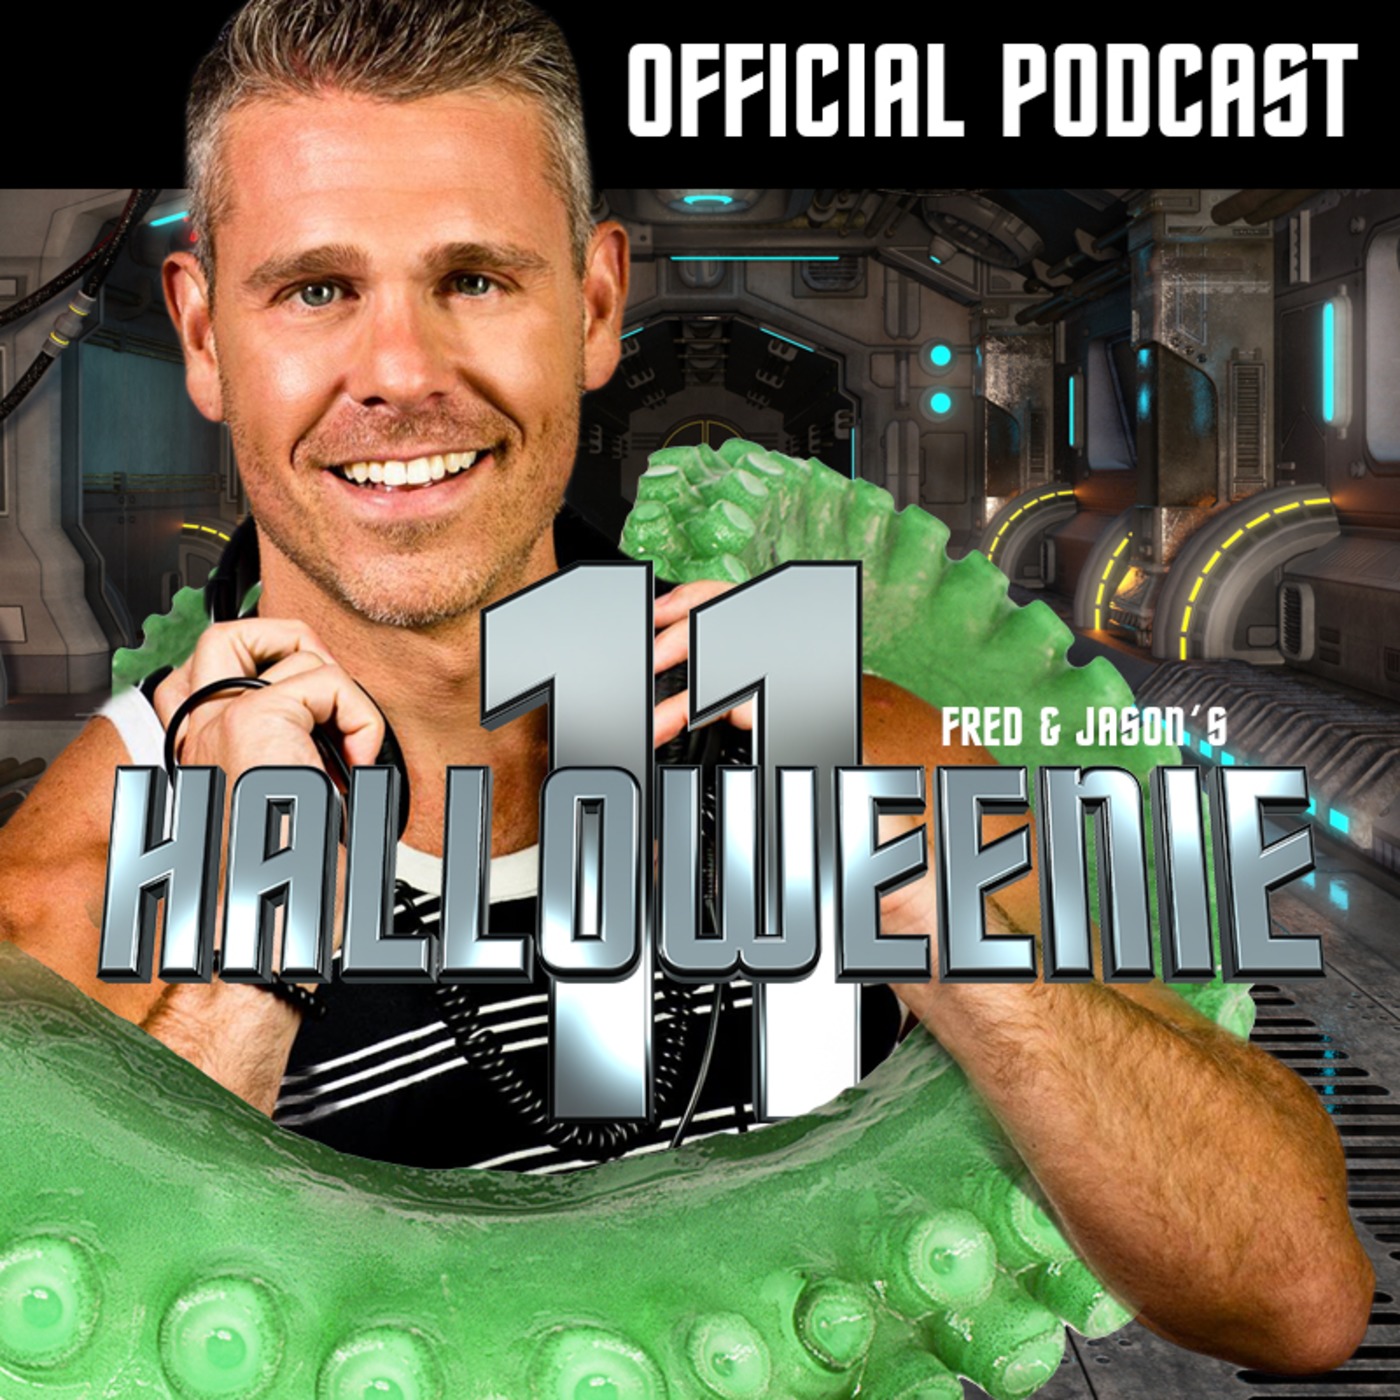 The Official Podcast of HALLOWEENIE 11 (2016)